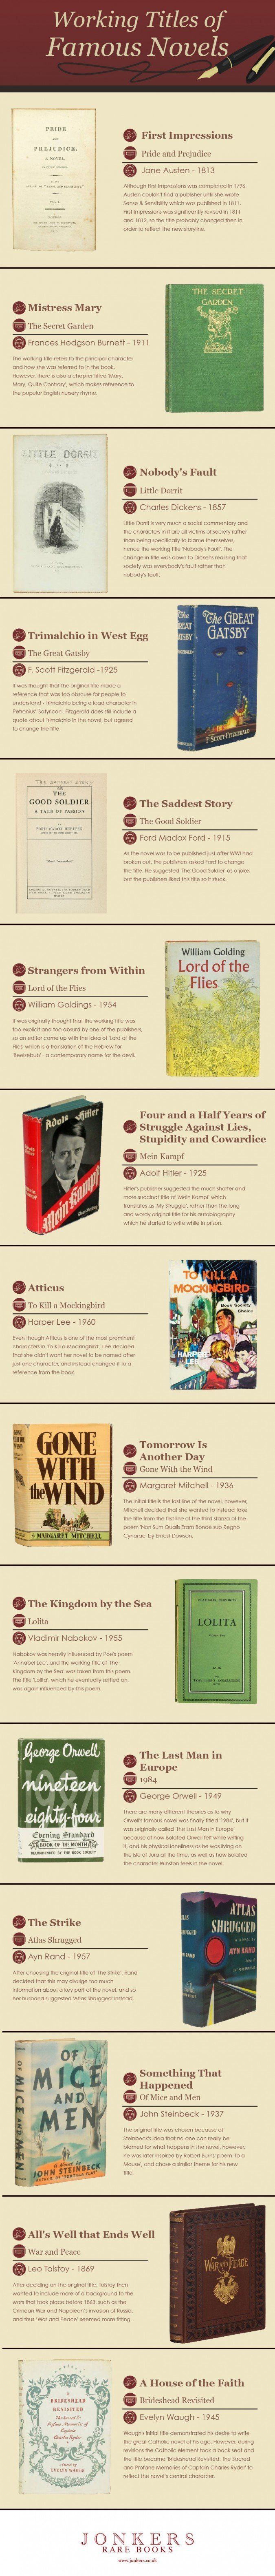 This Jonkers infographic tells the backstories behind working titles of classic books.